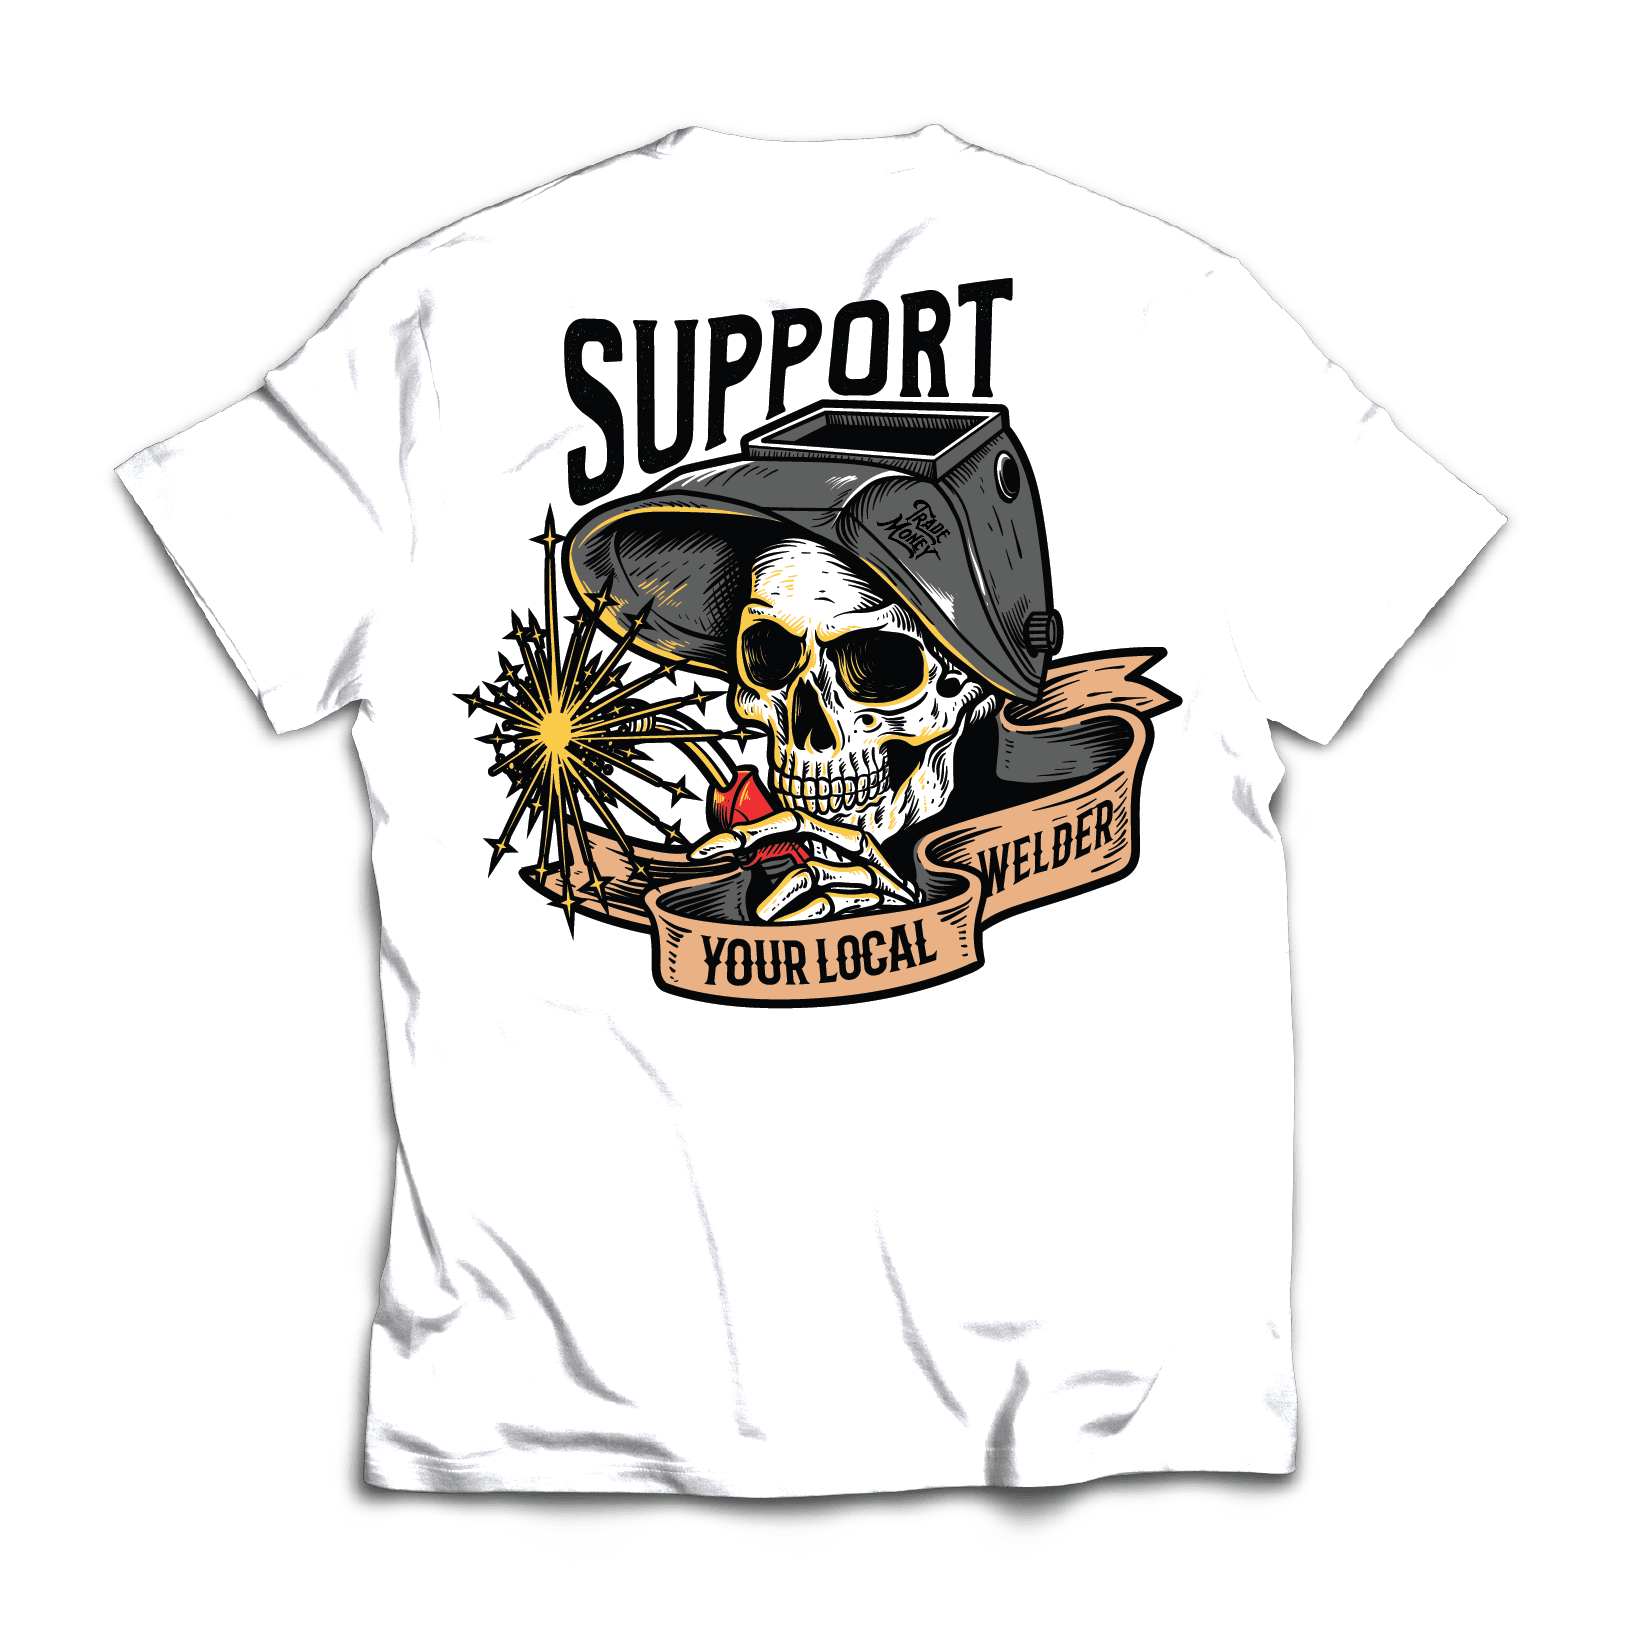 Support Your Local Welder Tee, White - Purpose-Built / Home of the Trades